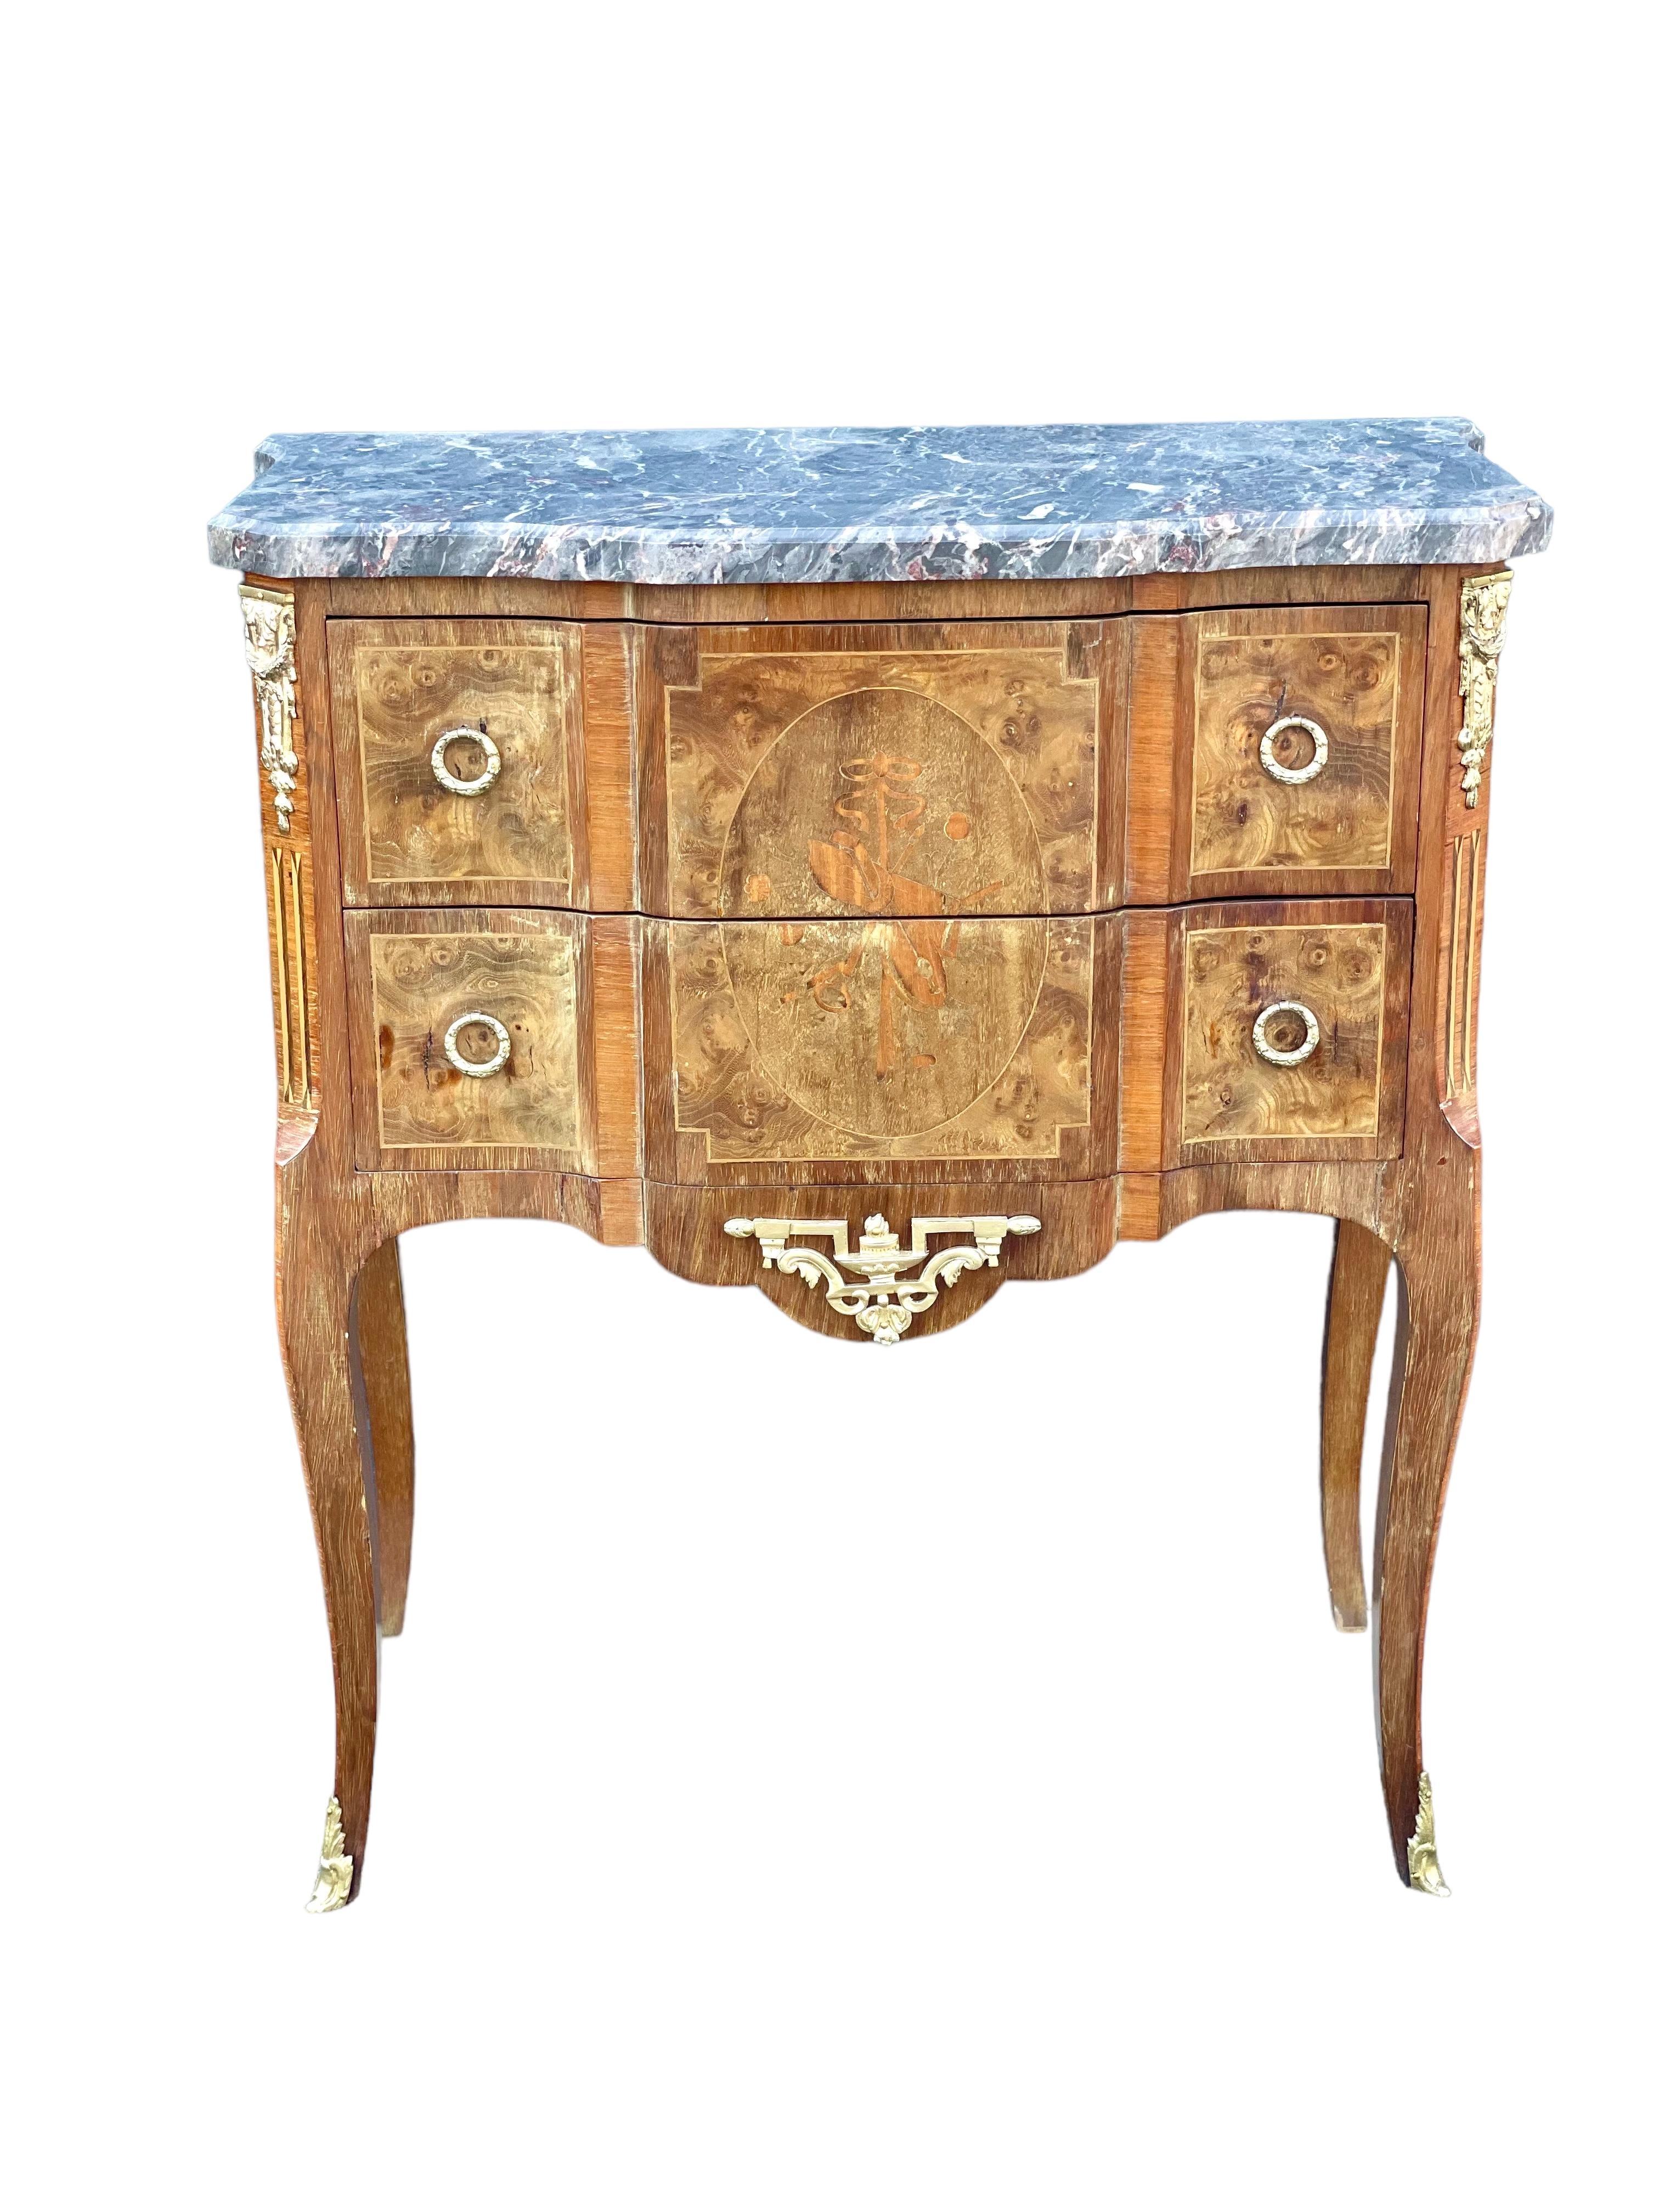 19th Century French Transitional Commodes with Marble Tops For Sale 12